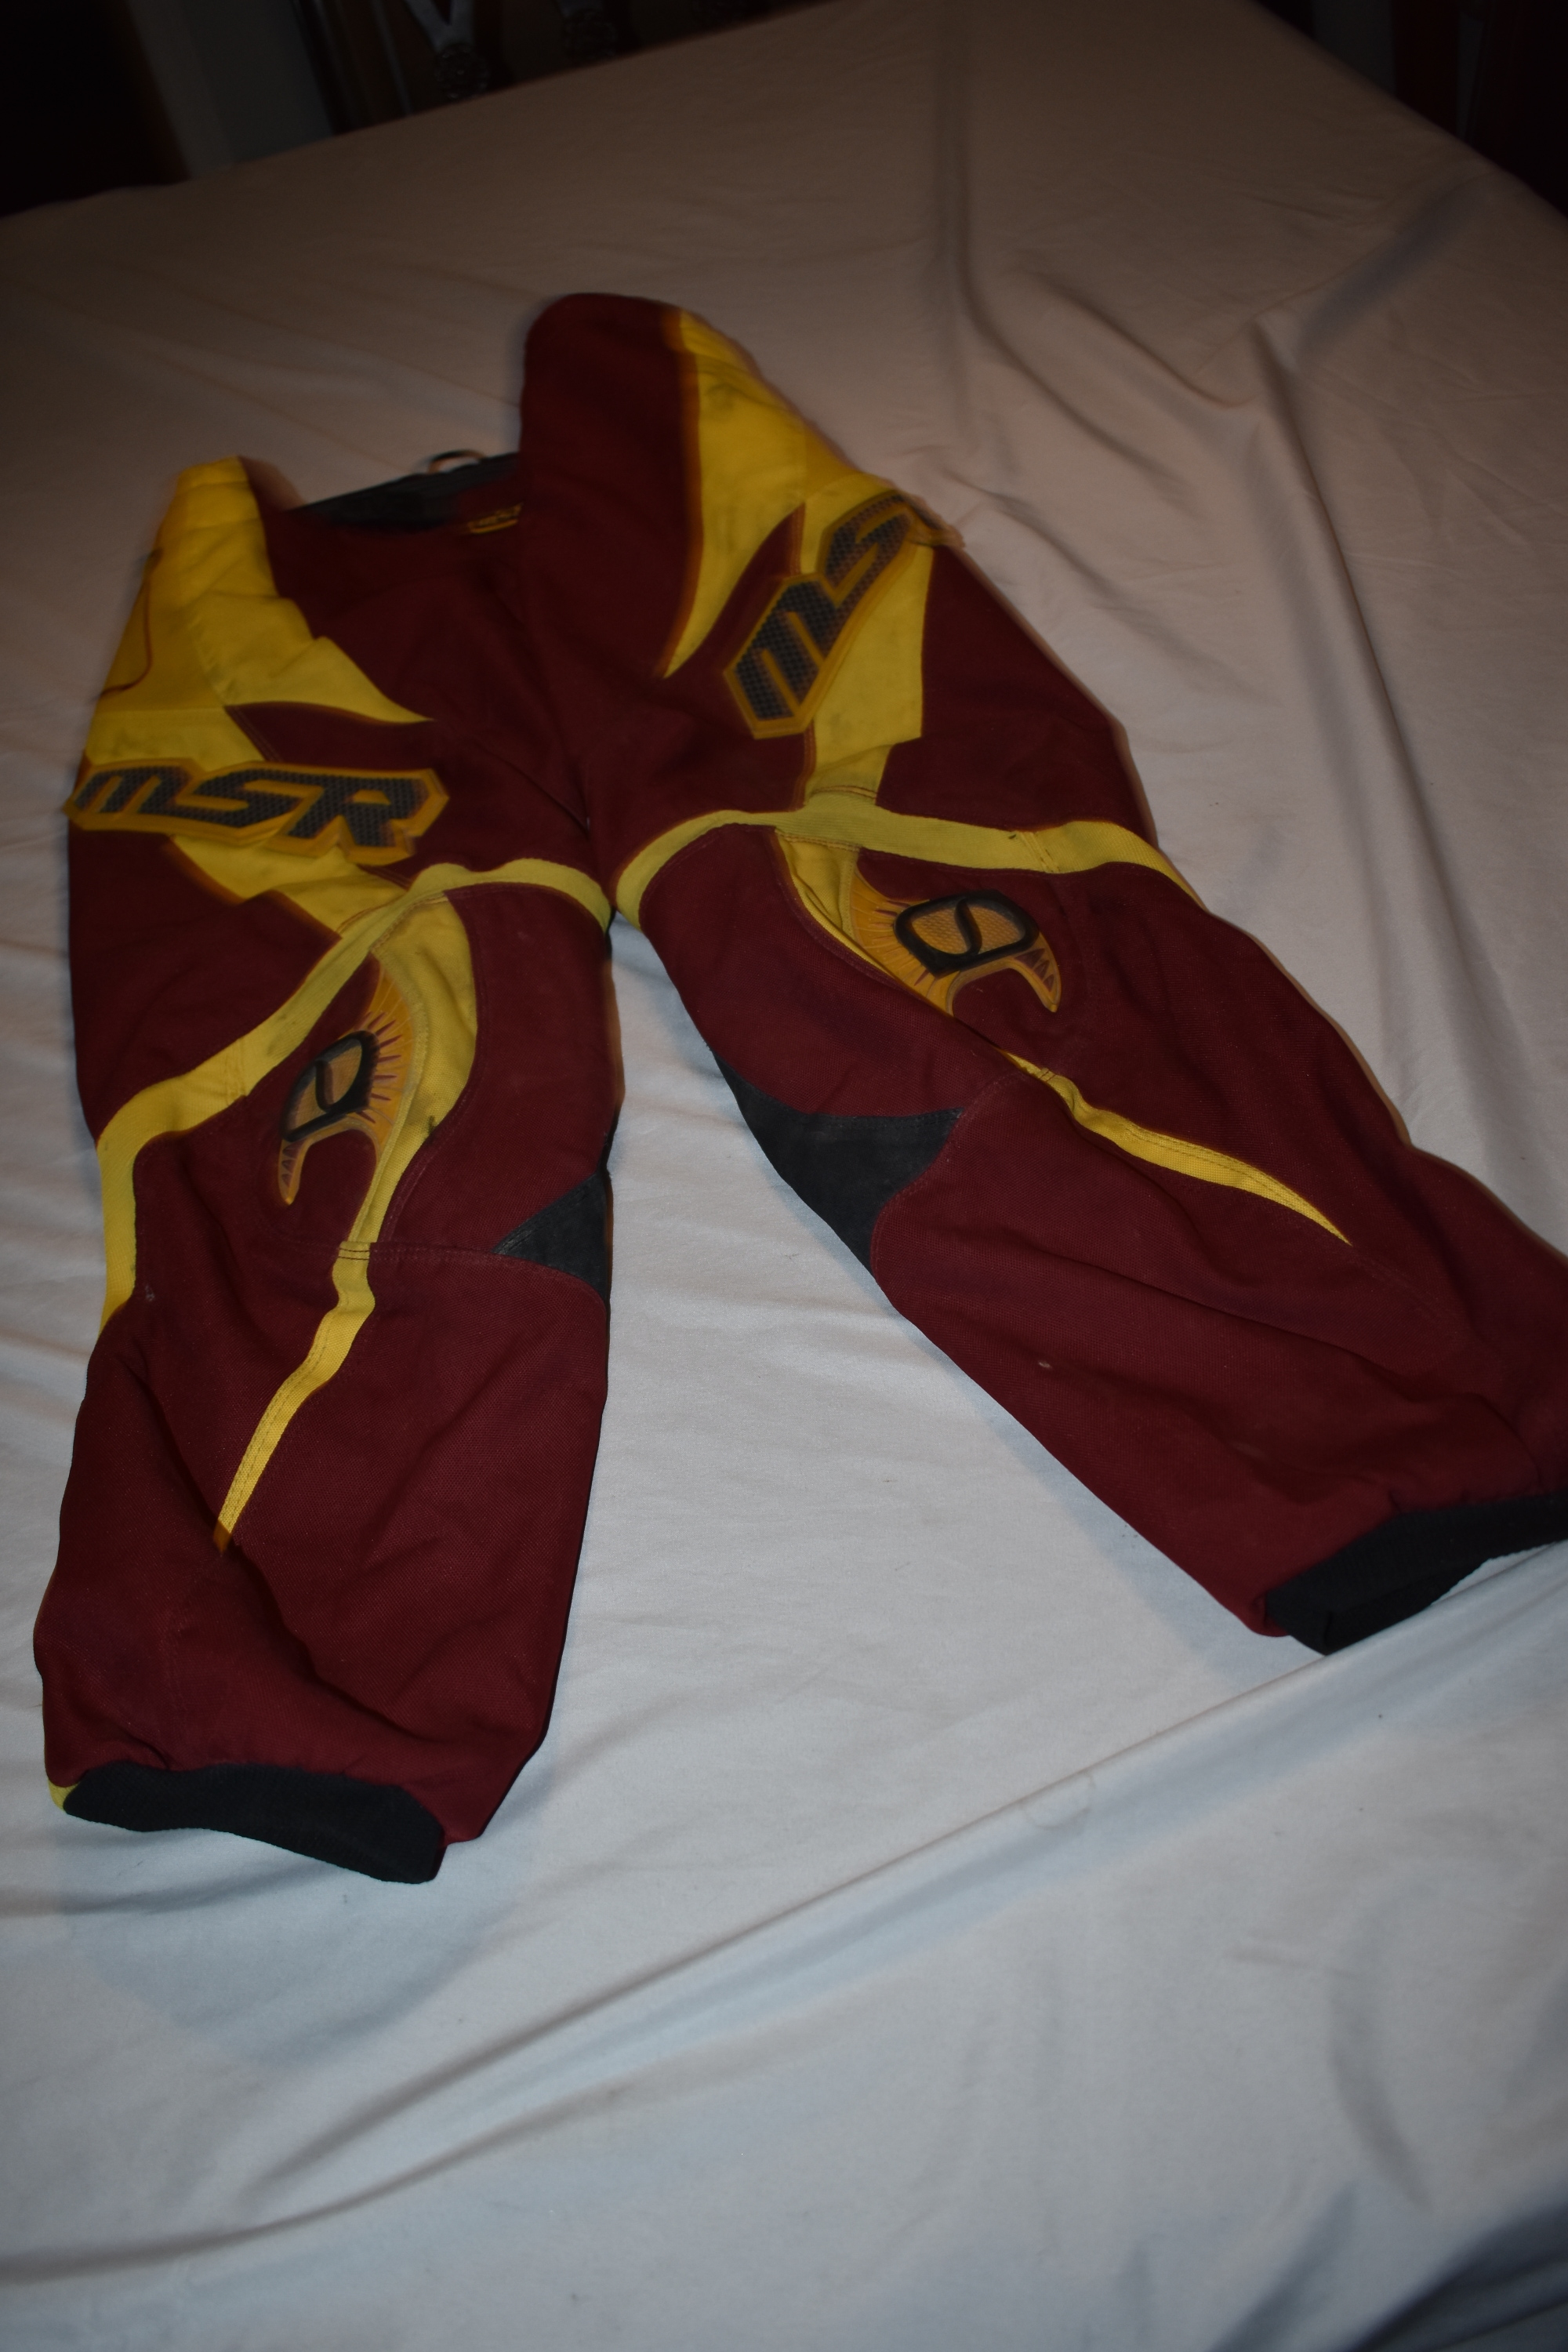 MSR AXXIS Motocross Pants, Red/Yellow, Size 32